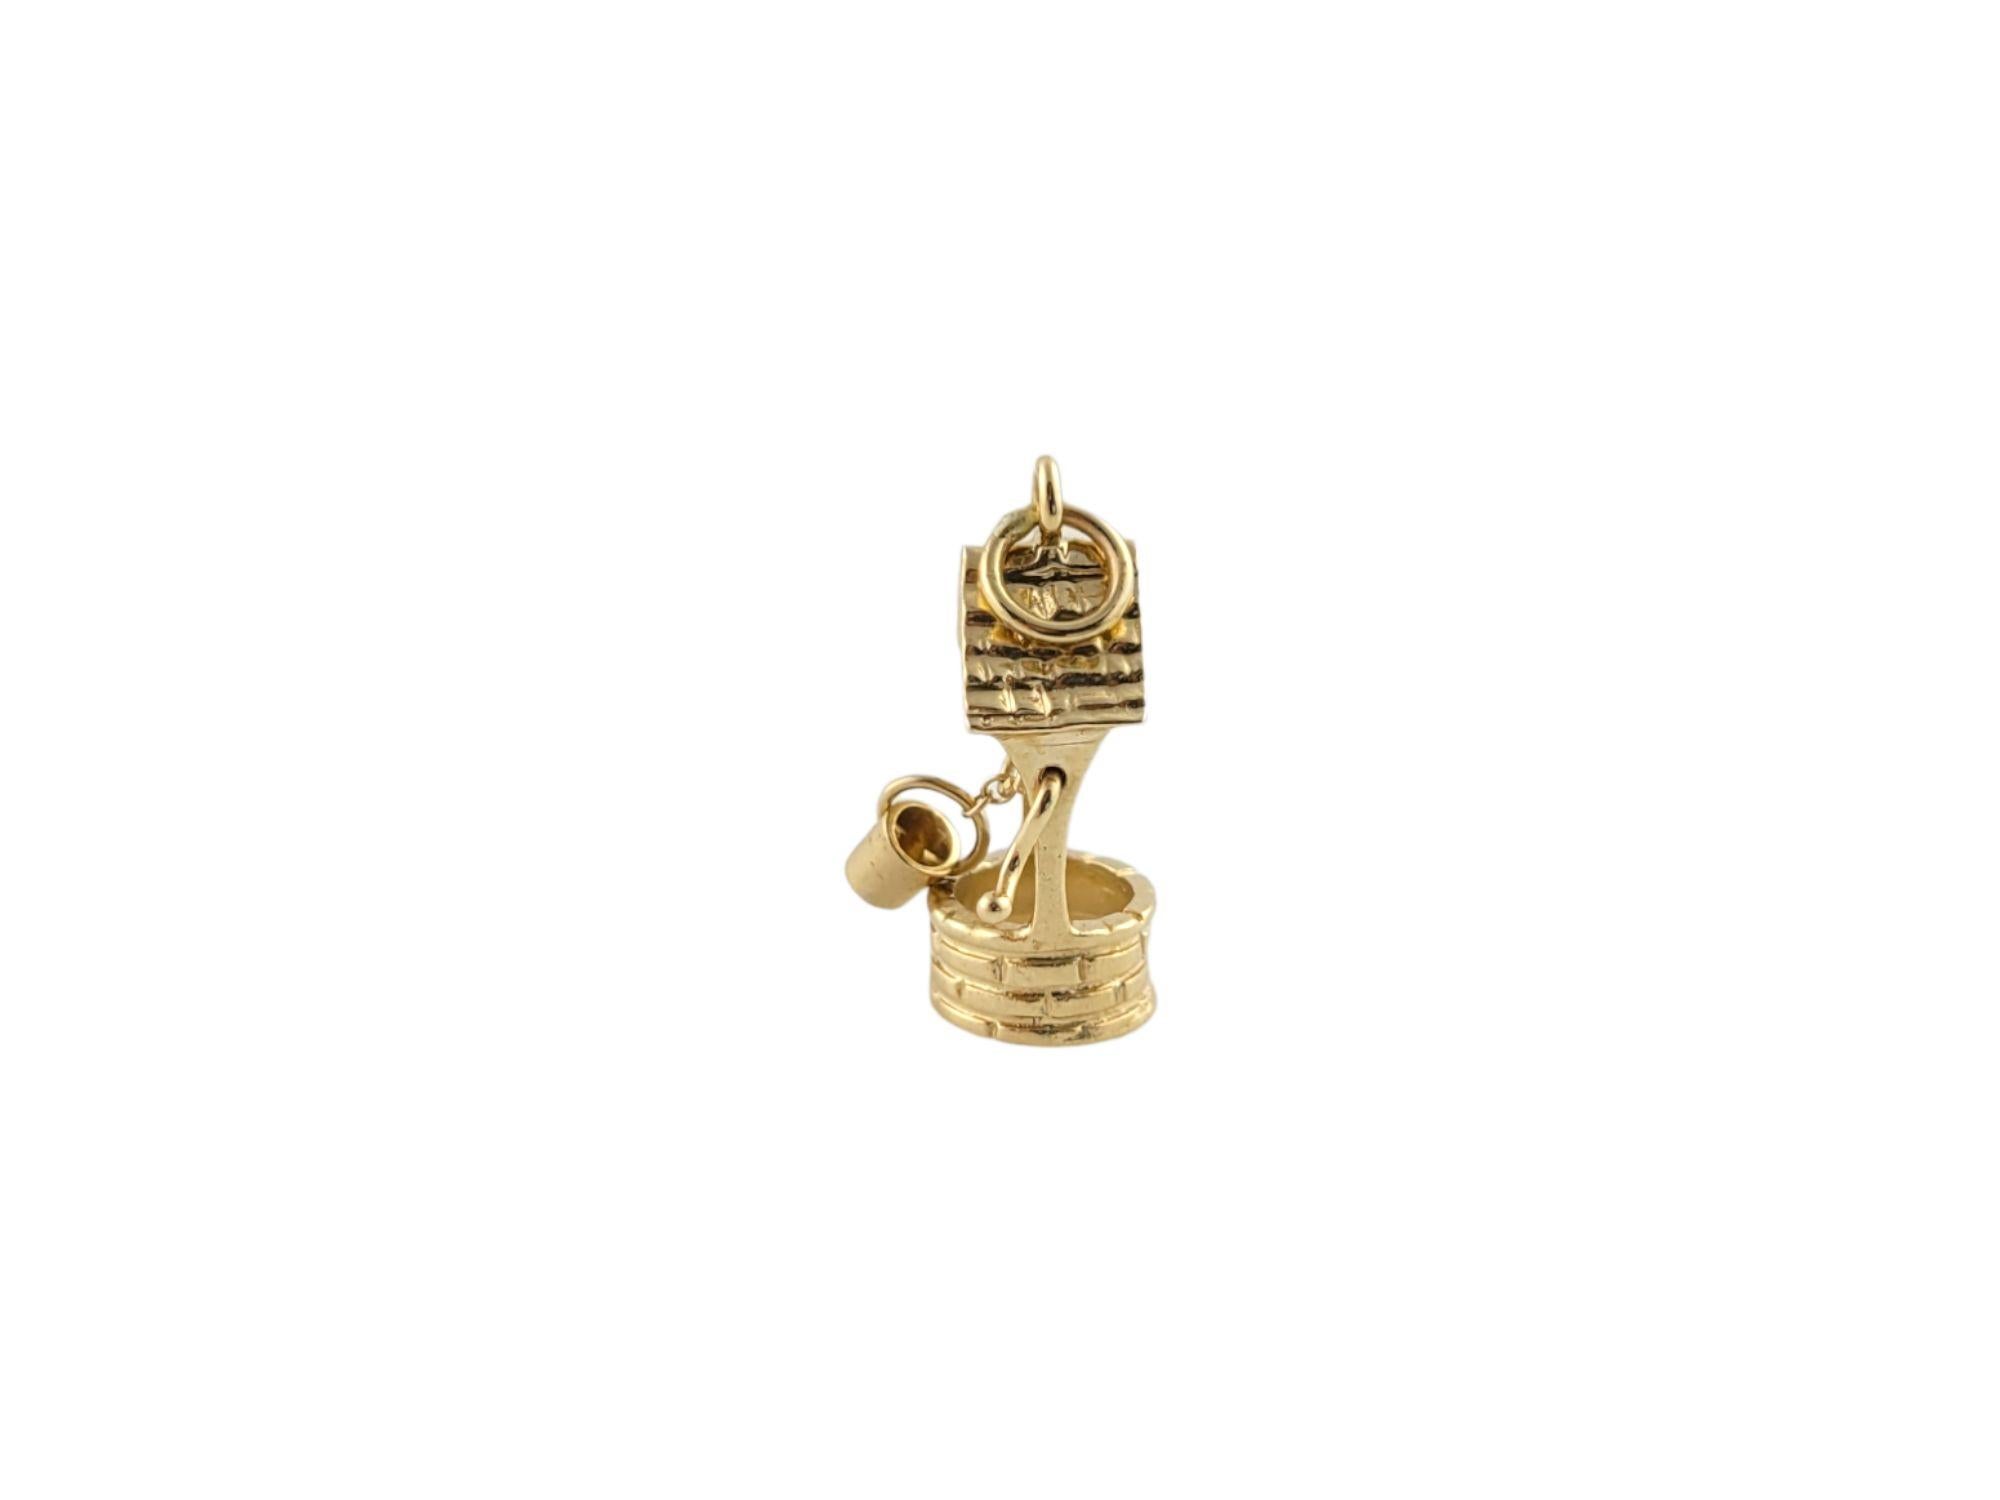 Beautiful water well charm that's crafted in 14k yellow gold has a mechanical lever with the water bucket.

Dimensions: 21mm X 11mm

Weight: 2.9 gr / 1.8 dwt

Hallmark: 14K

Very good condition, professionally polished.

Will come packaged in a gift